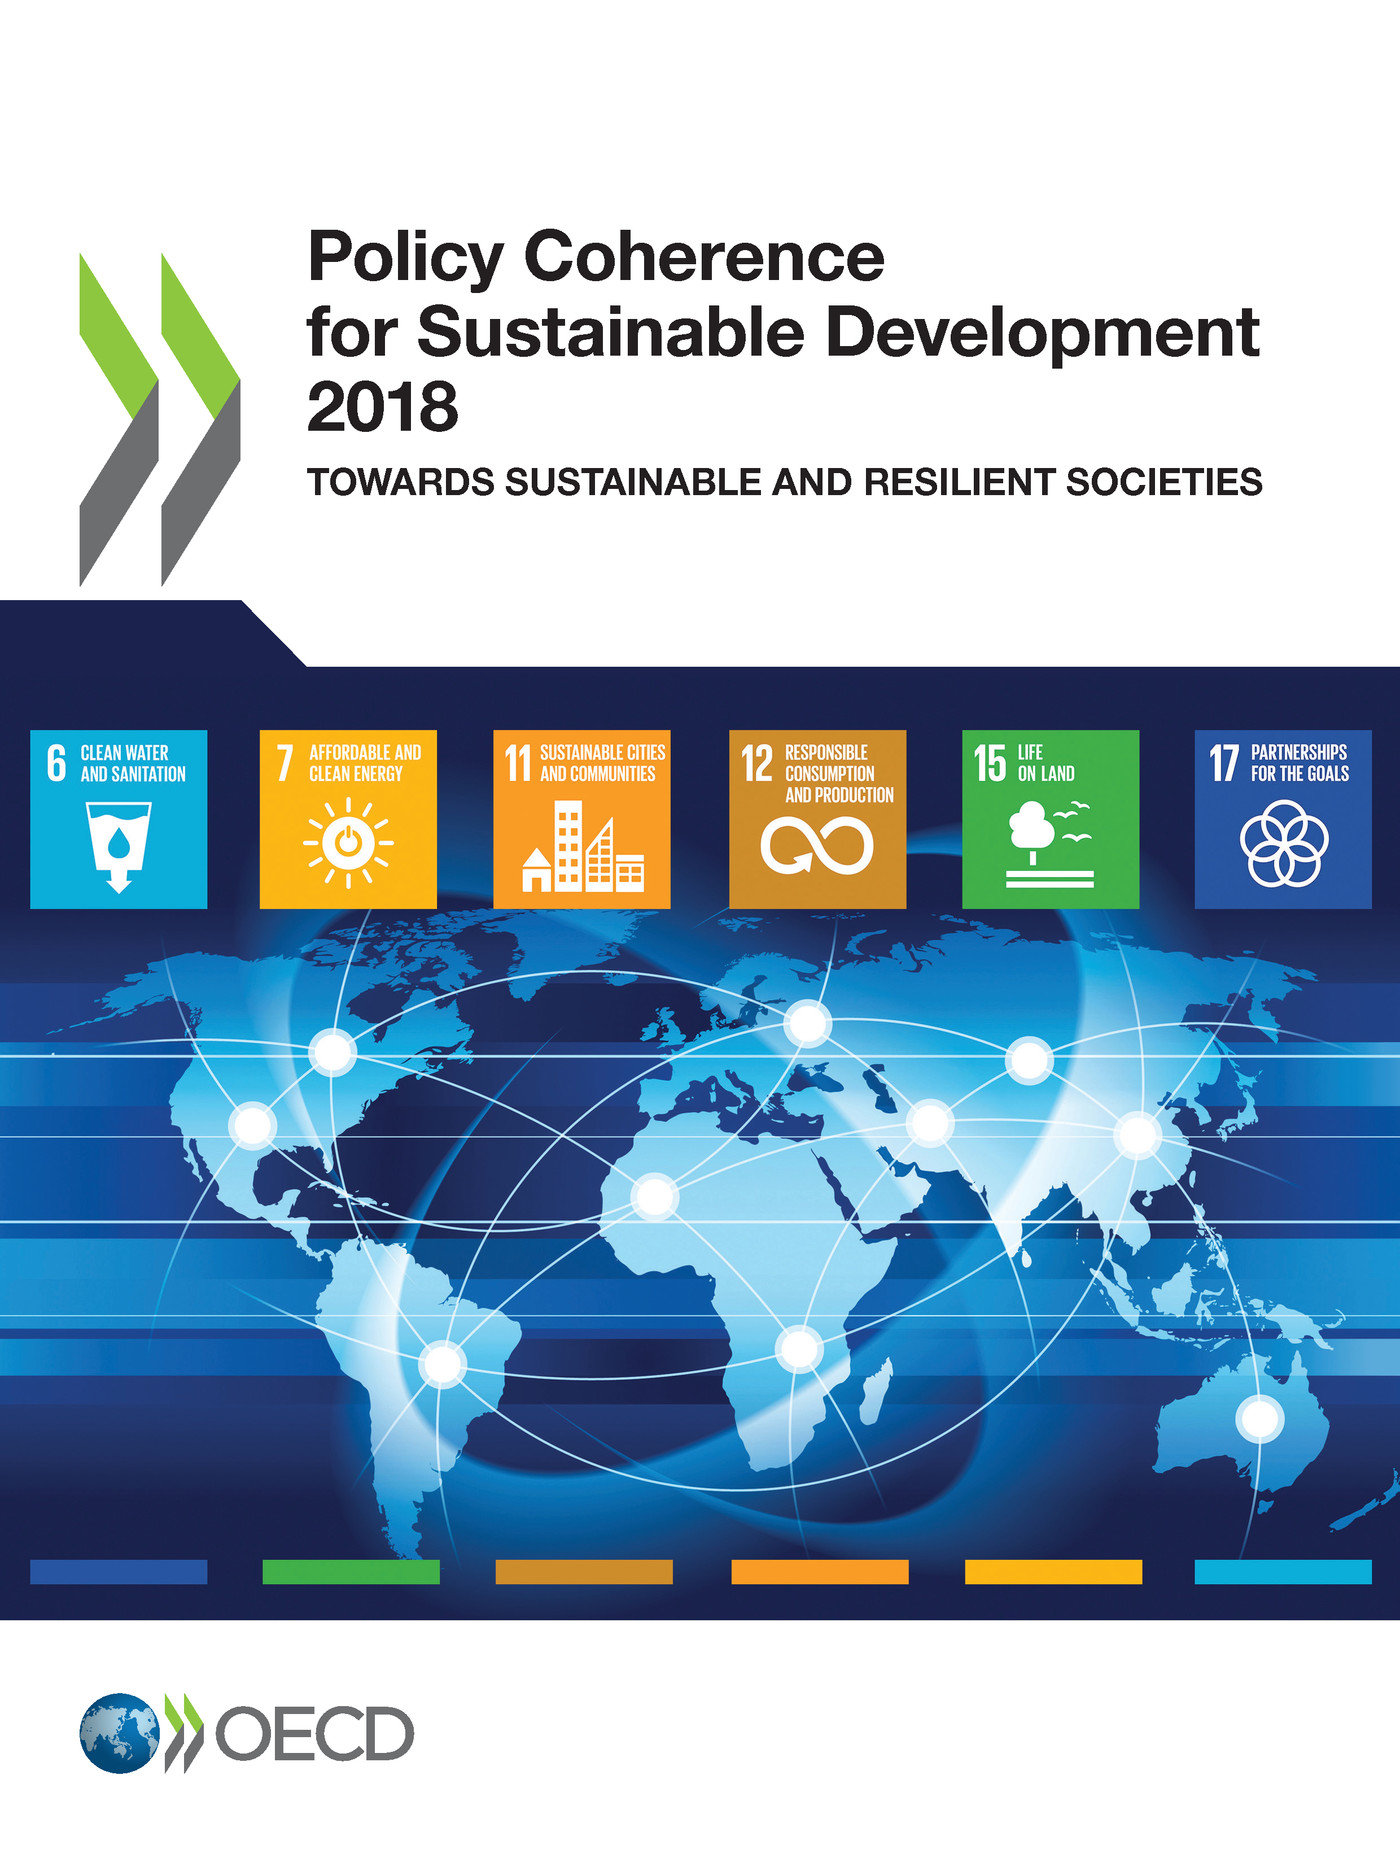 Policy Coherence for Sustainable Development 2018 -  Collectif - OCDE / OECD